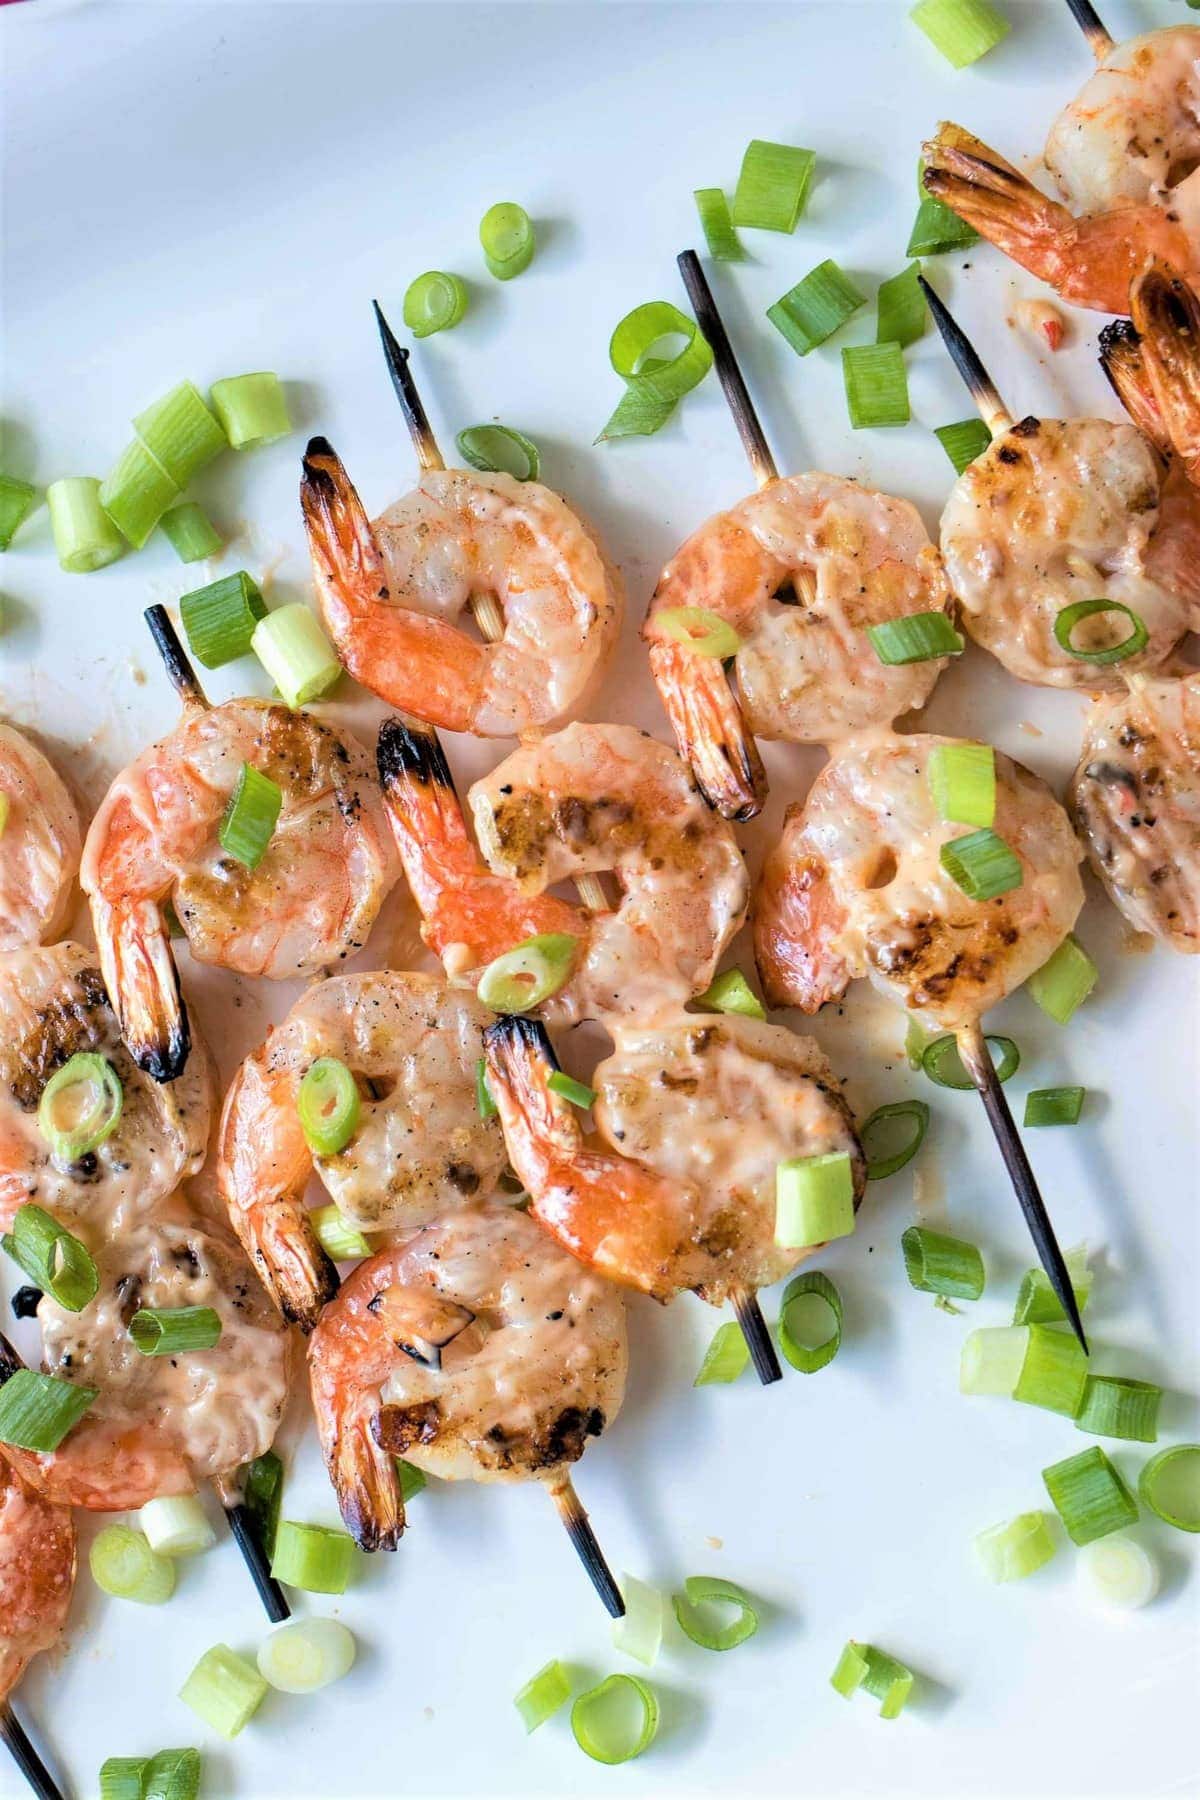 Grilled Bang Bang Shrimp Skewers - Grilled shrimp skewers covered in a spicy, creamy, sweet chili sauce. Perfect for the summer barbecues!